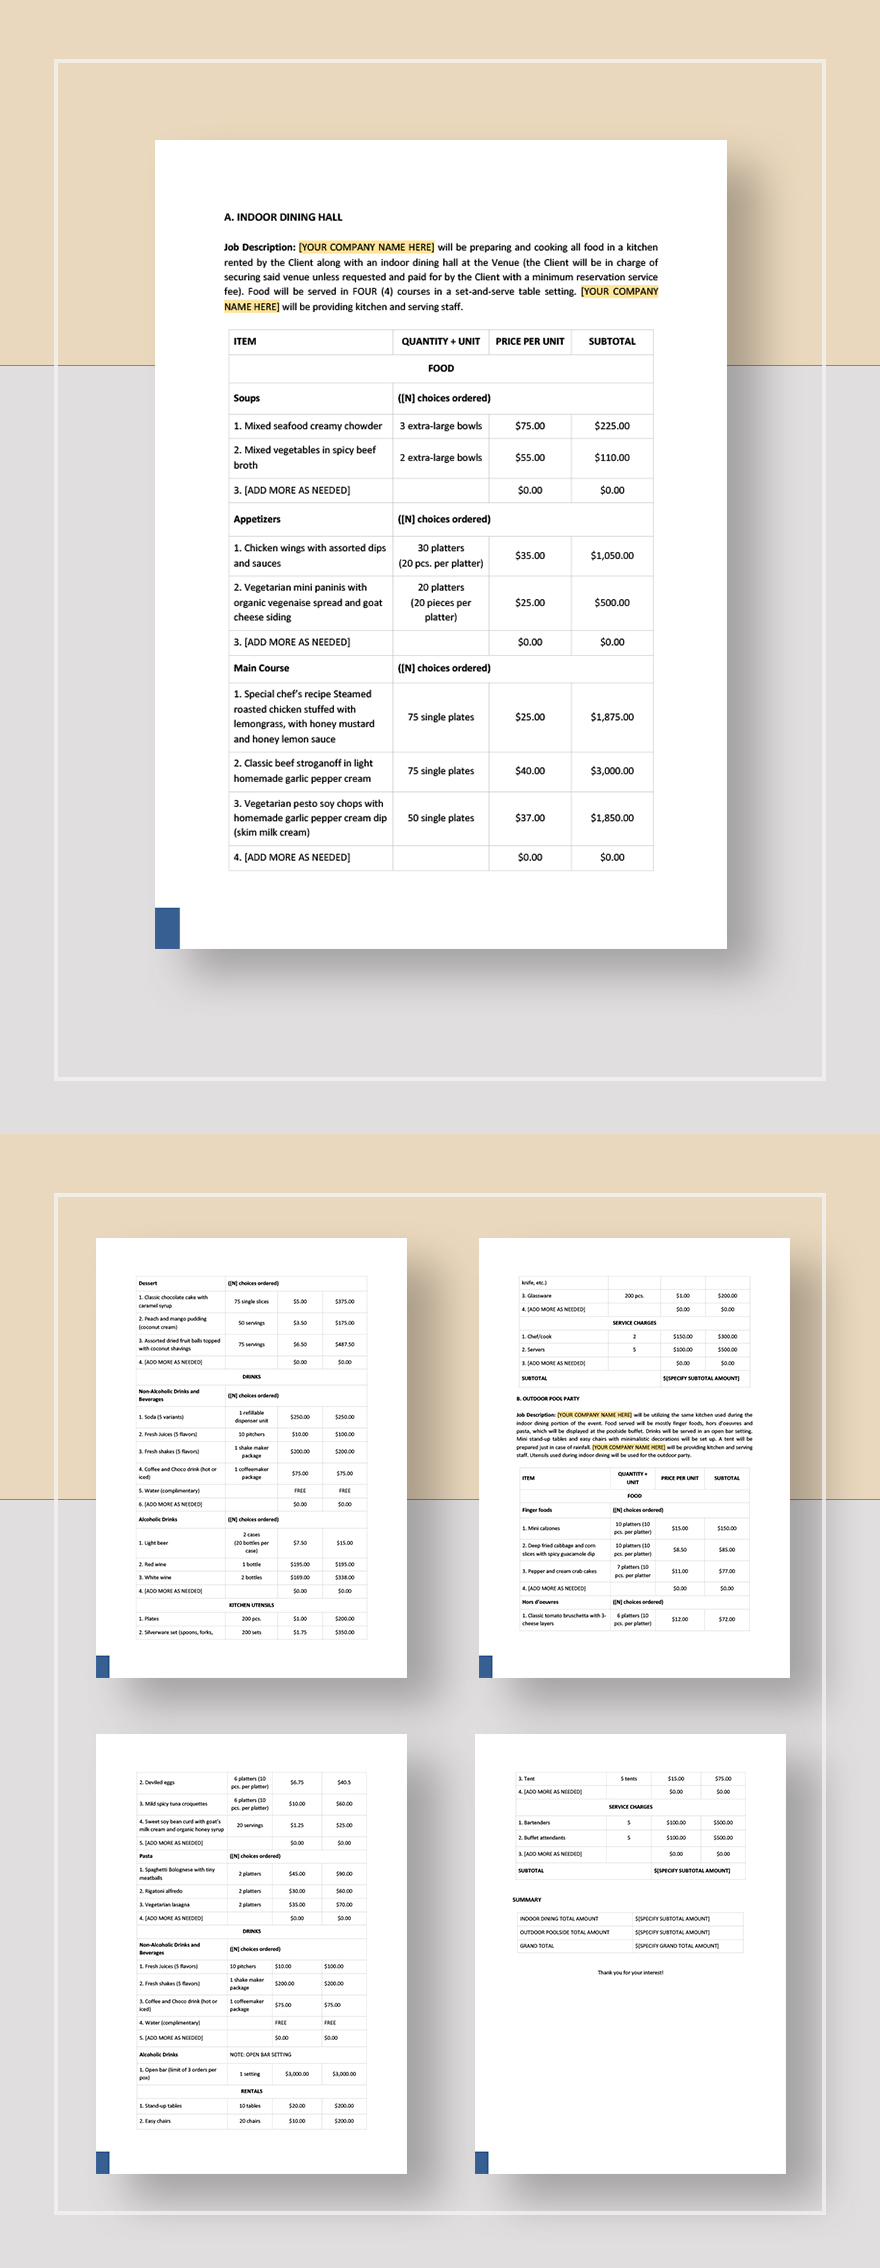 Catering Quotation Template